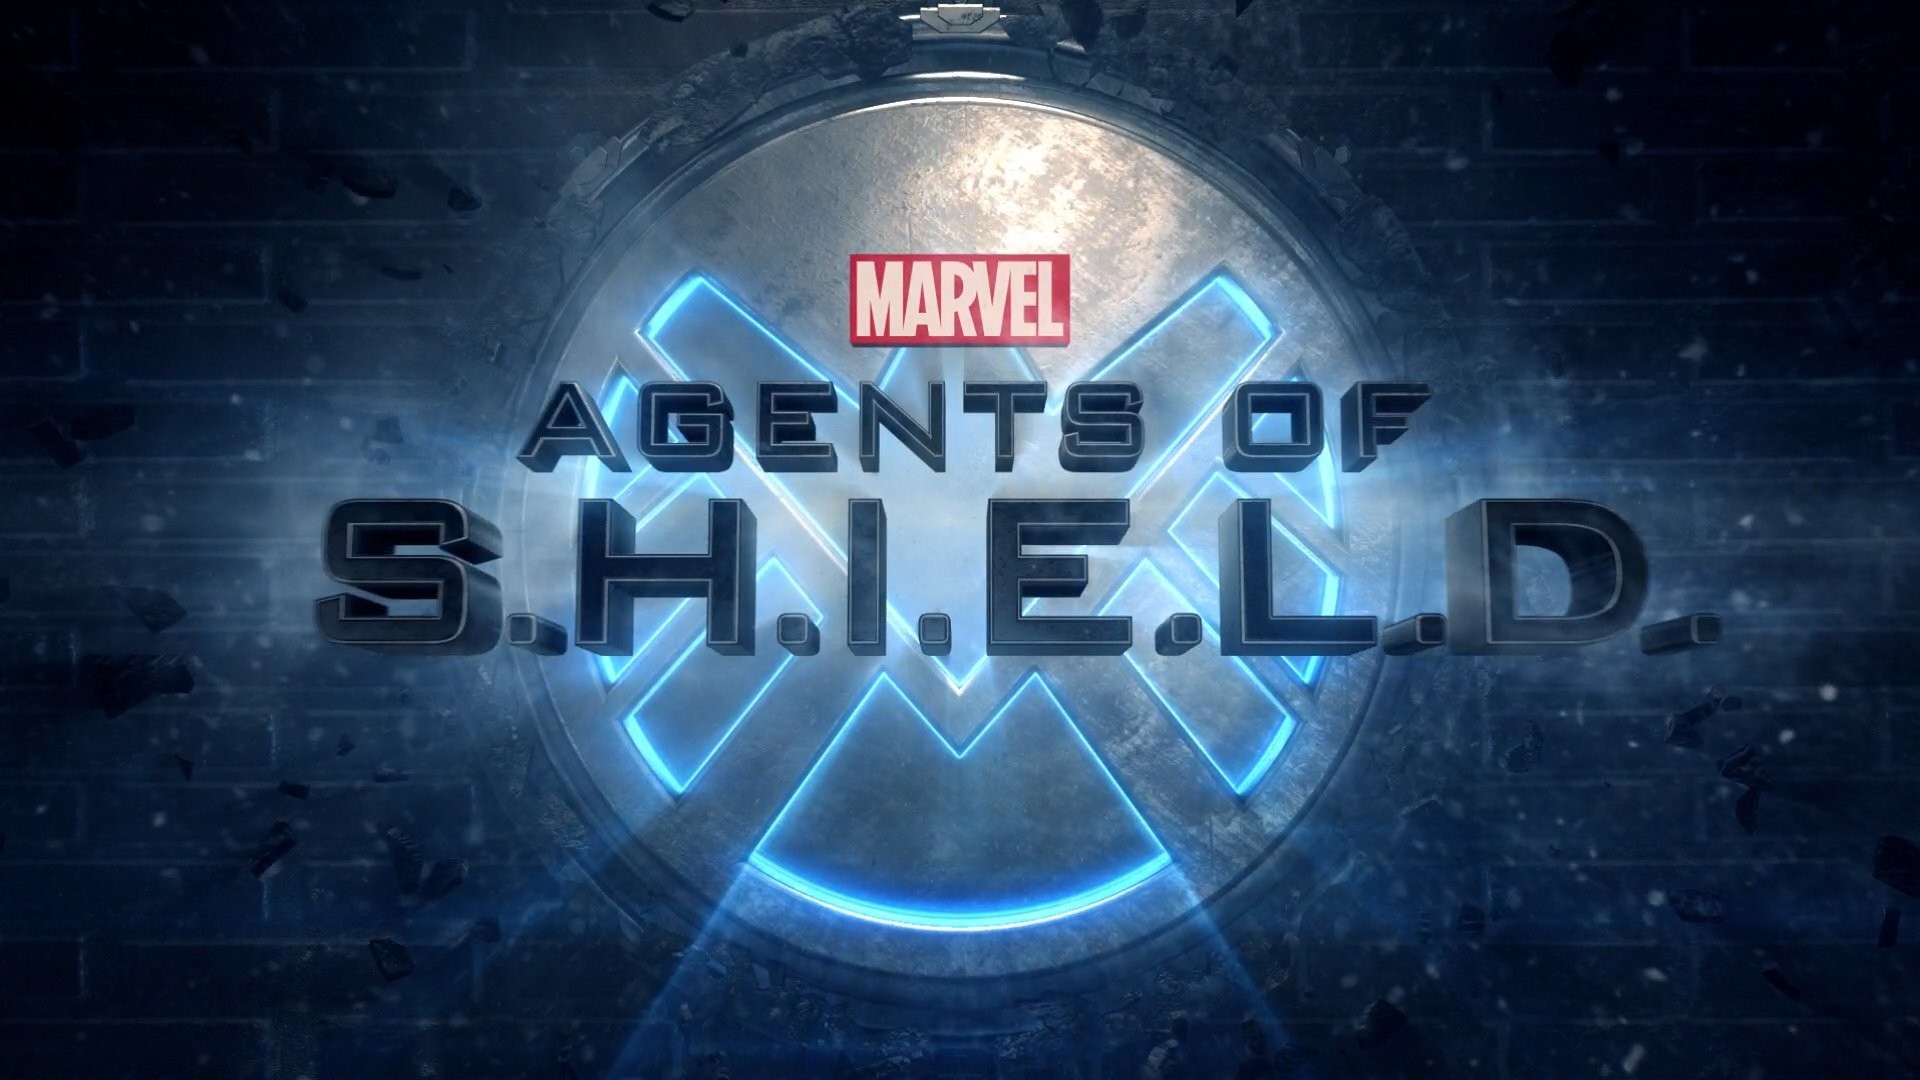 Why agents of shield has the representation that matters